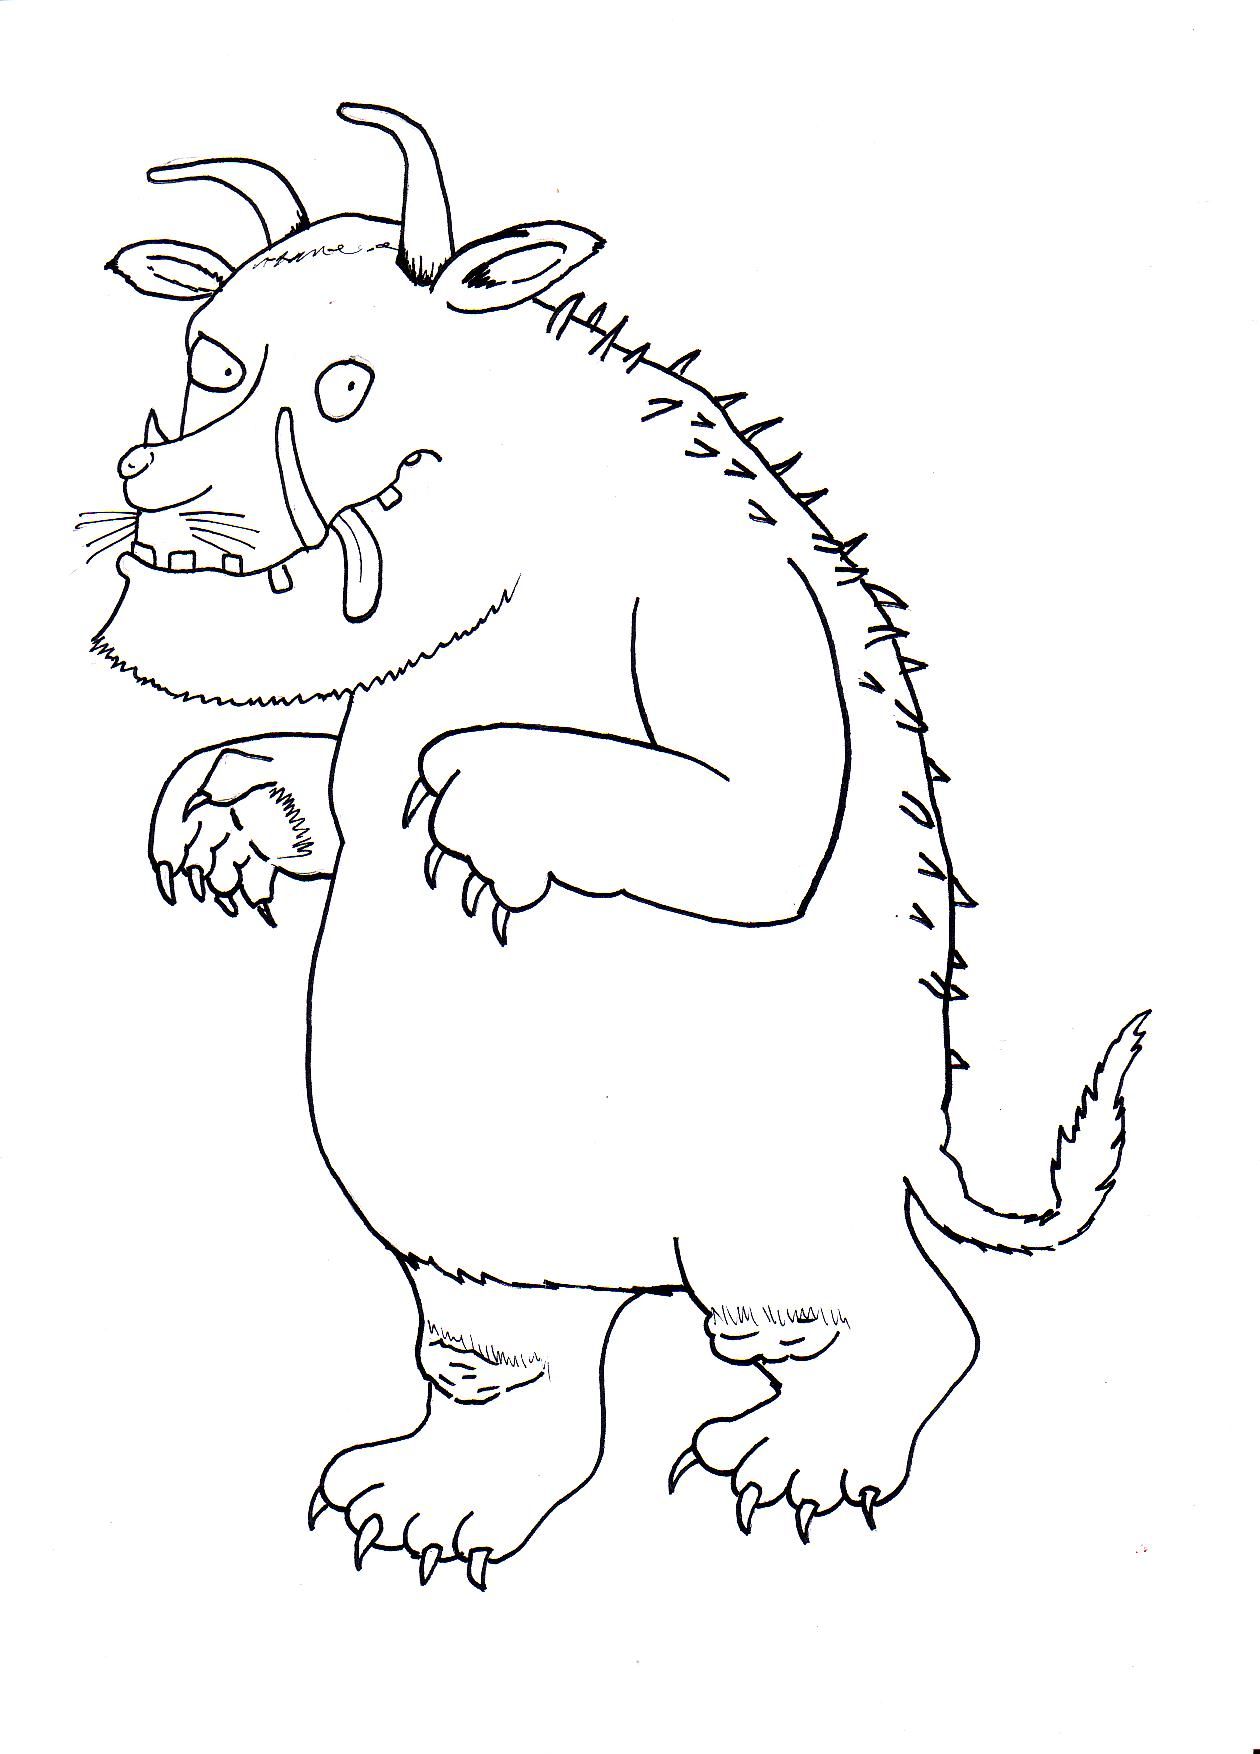 Gruffalo Coloring Pages at GetColorings.com | Free printable colorings